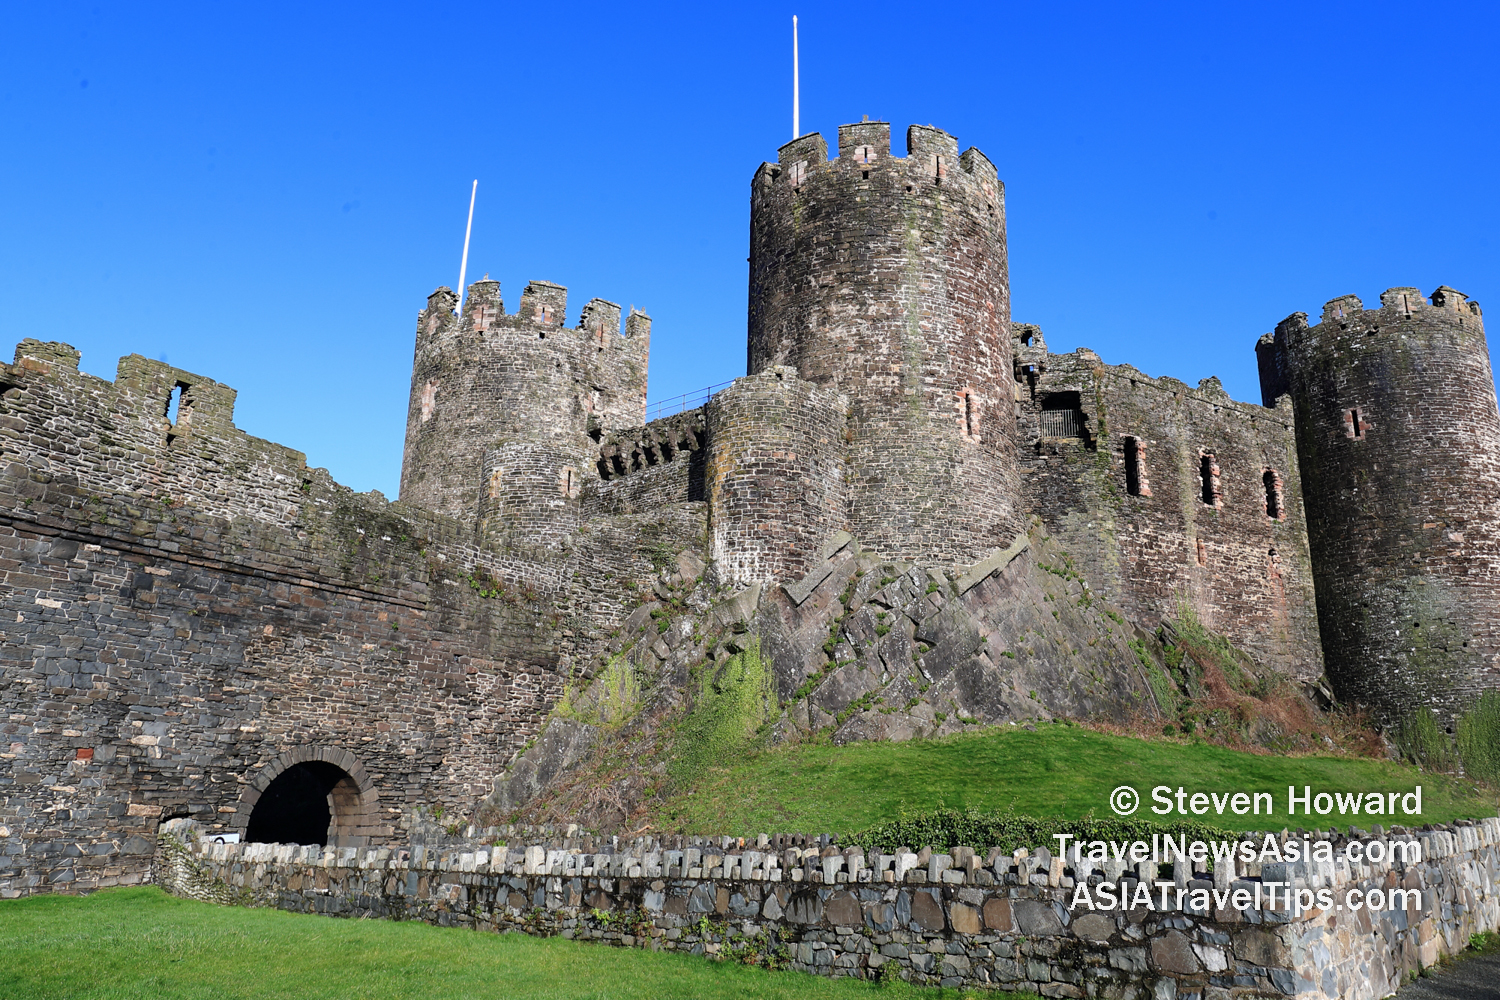 Conwy Castle in north Wales. Picture by Steven Howard of TravelNewsAsia.com Click to enlarge.